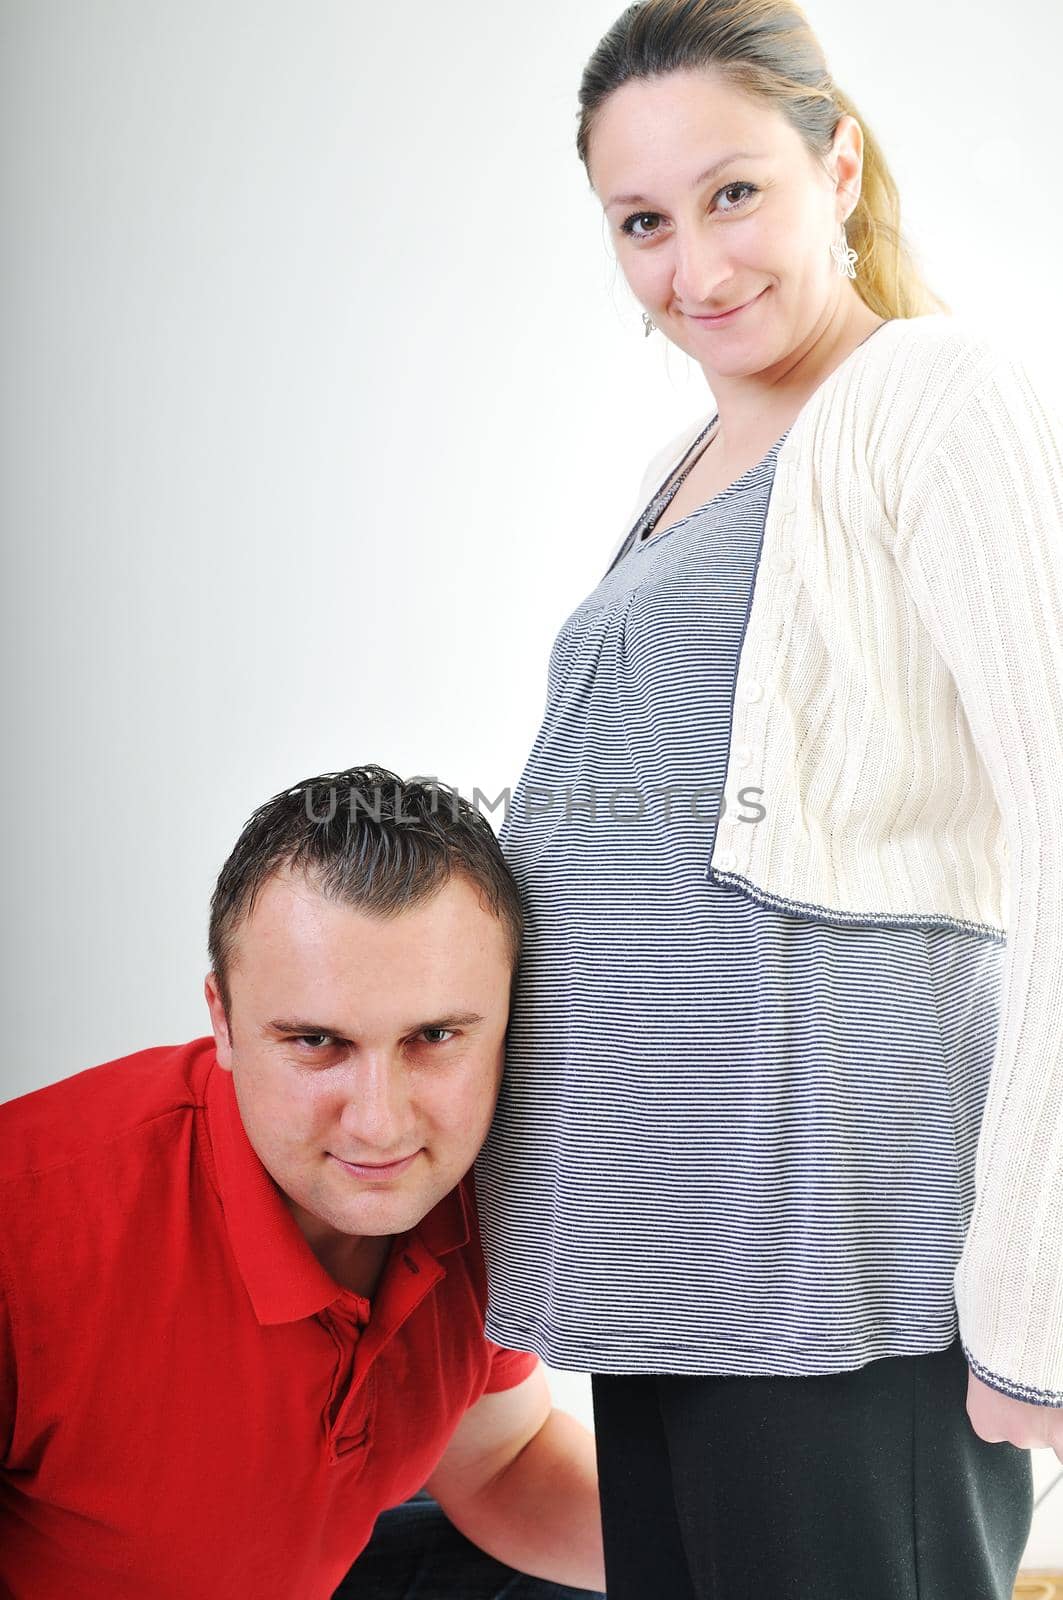 young family couple together in studio isolated on white. happy and waiting for baby